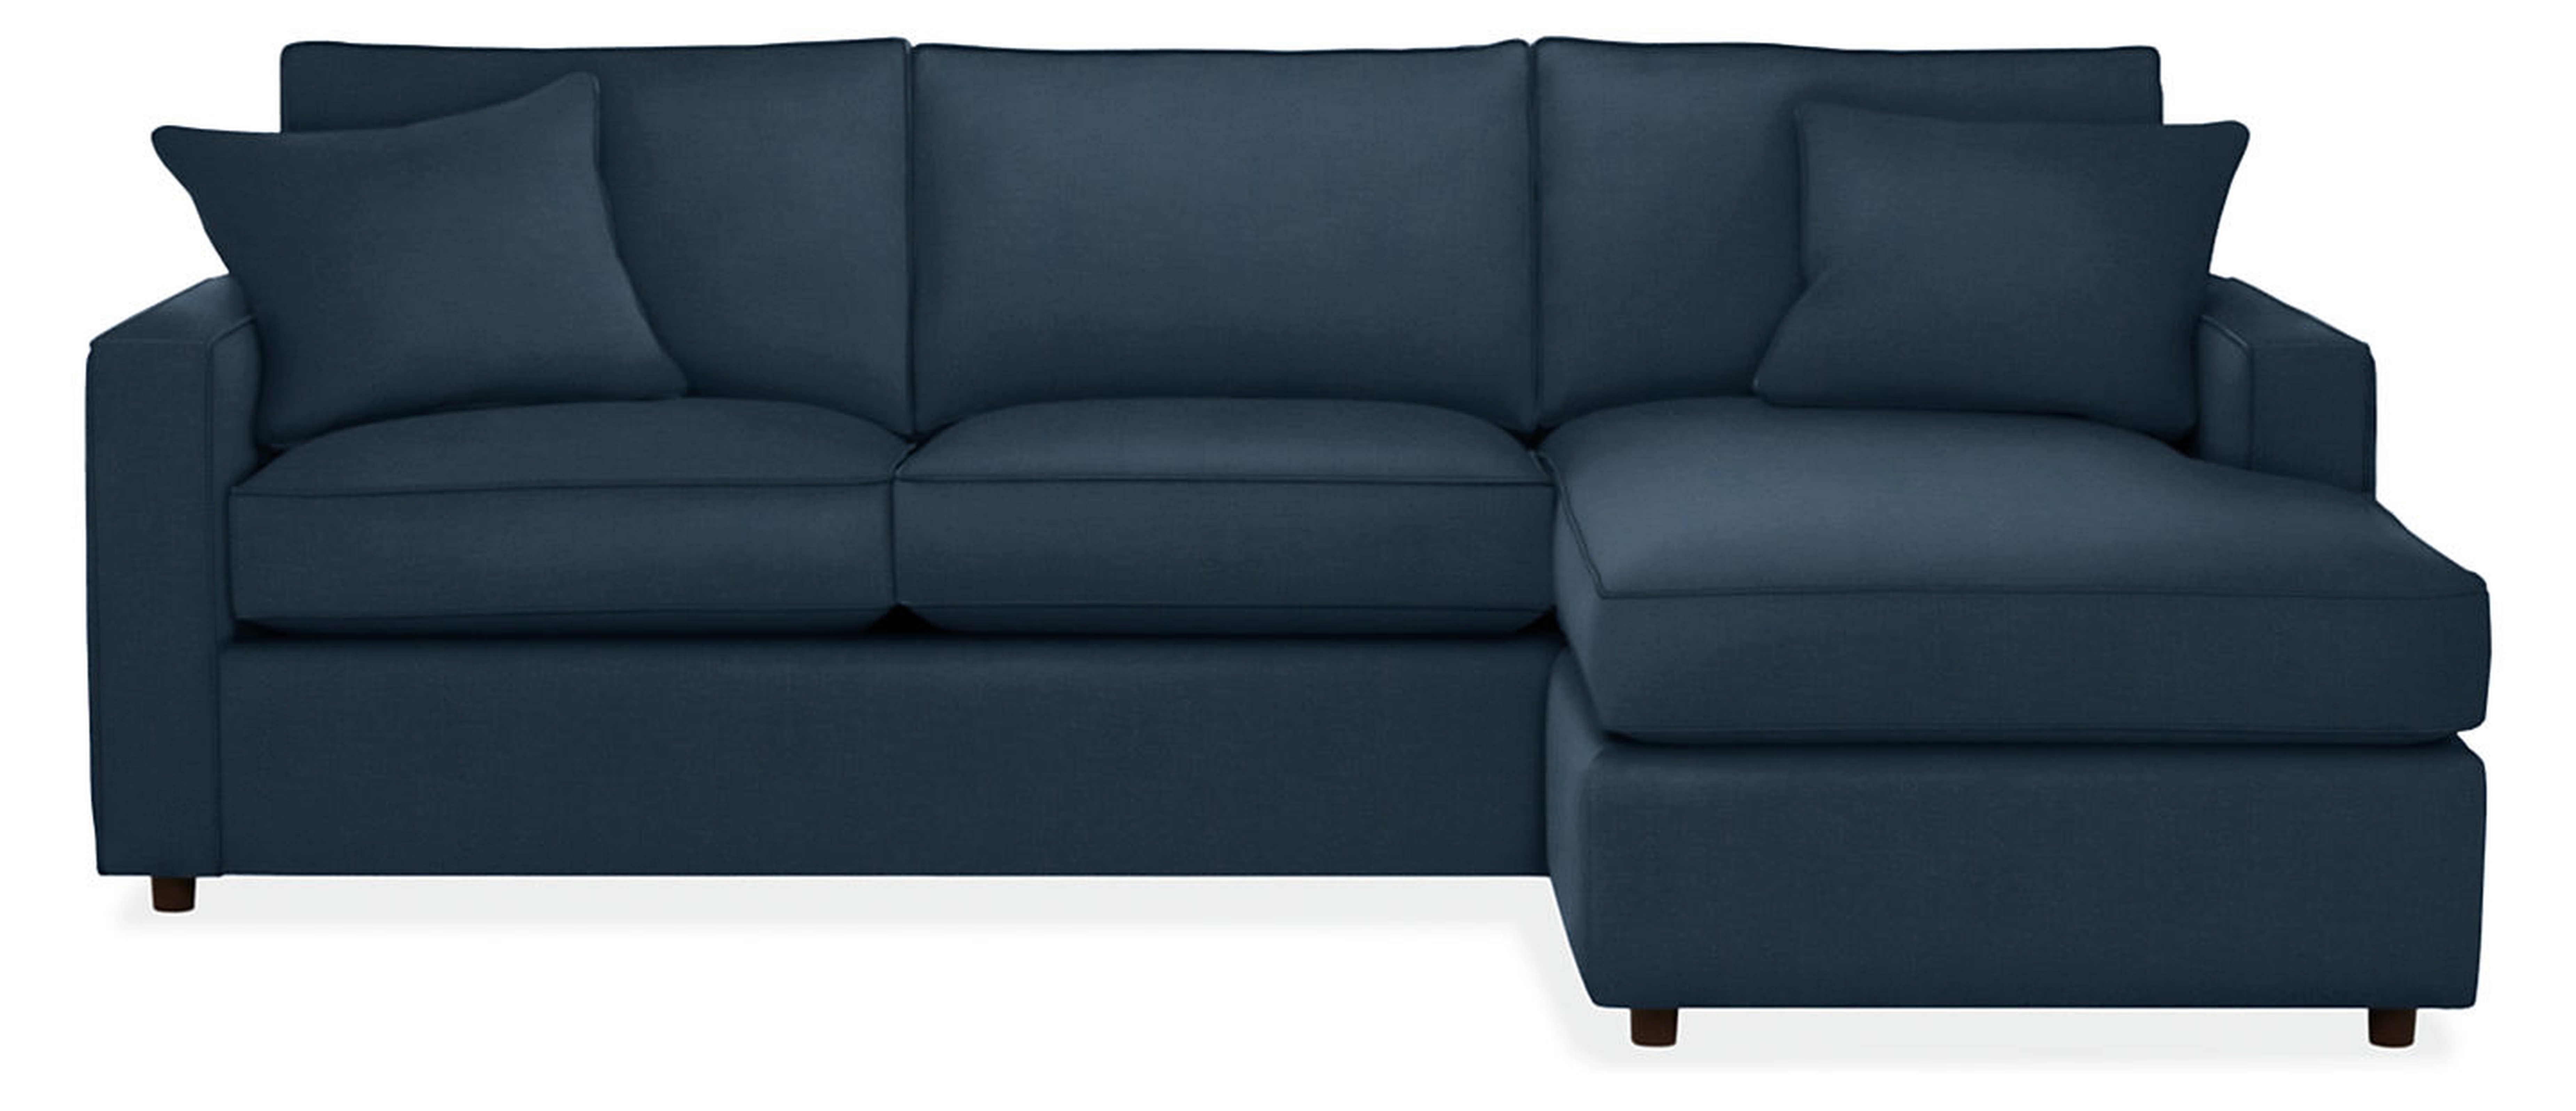 York Sectional - 98" Sofa With Reversible Chaise-Dawson ink (plain-weave) - Room & Board